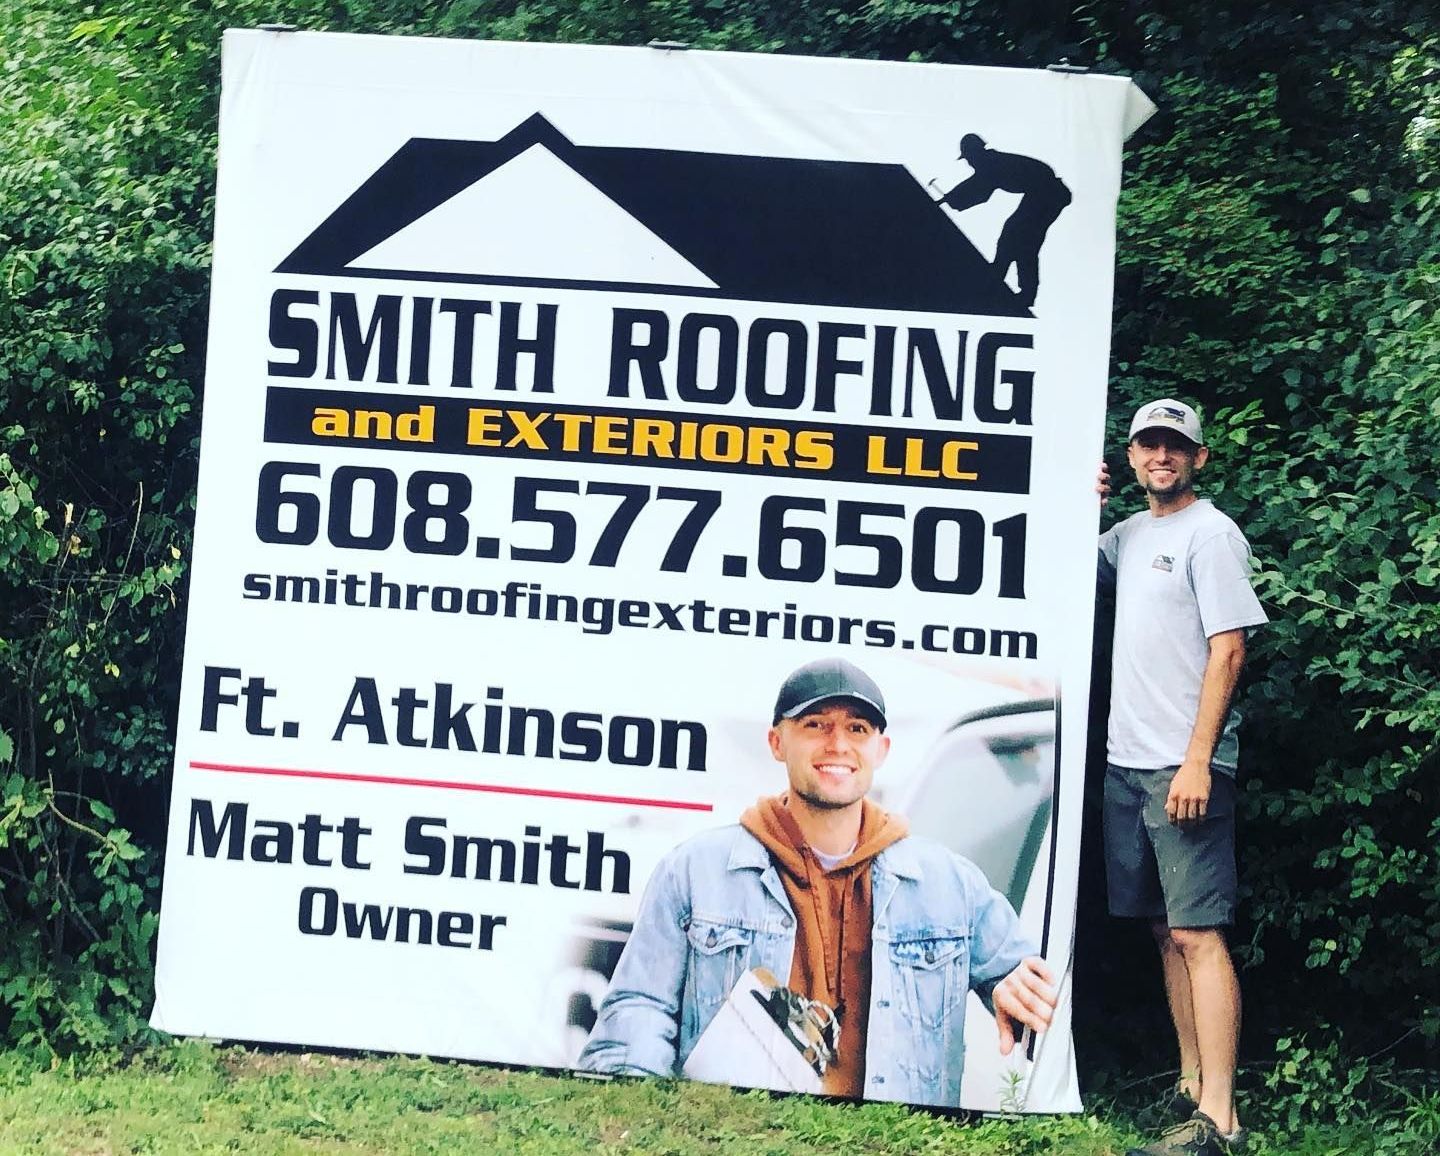 a man holding a sign for smith roofing and exteriors llc